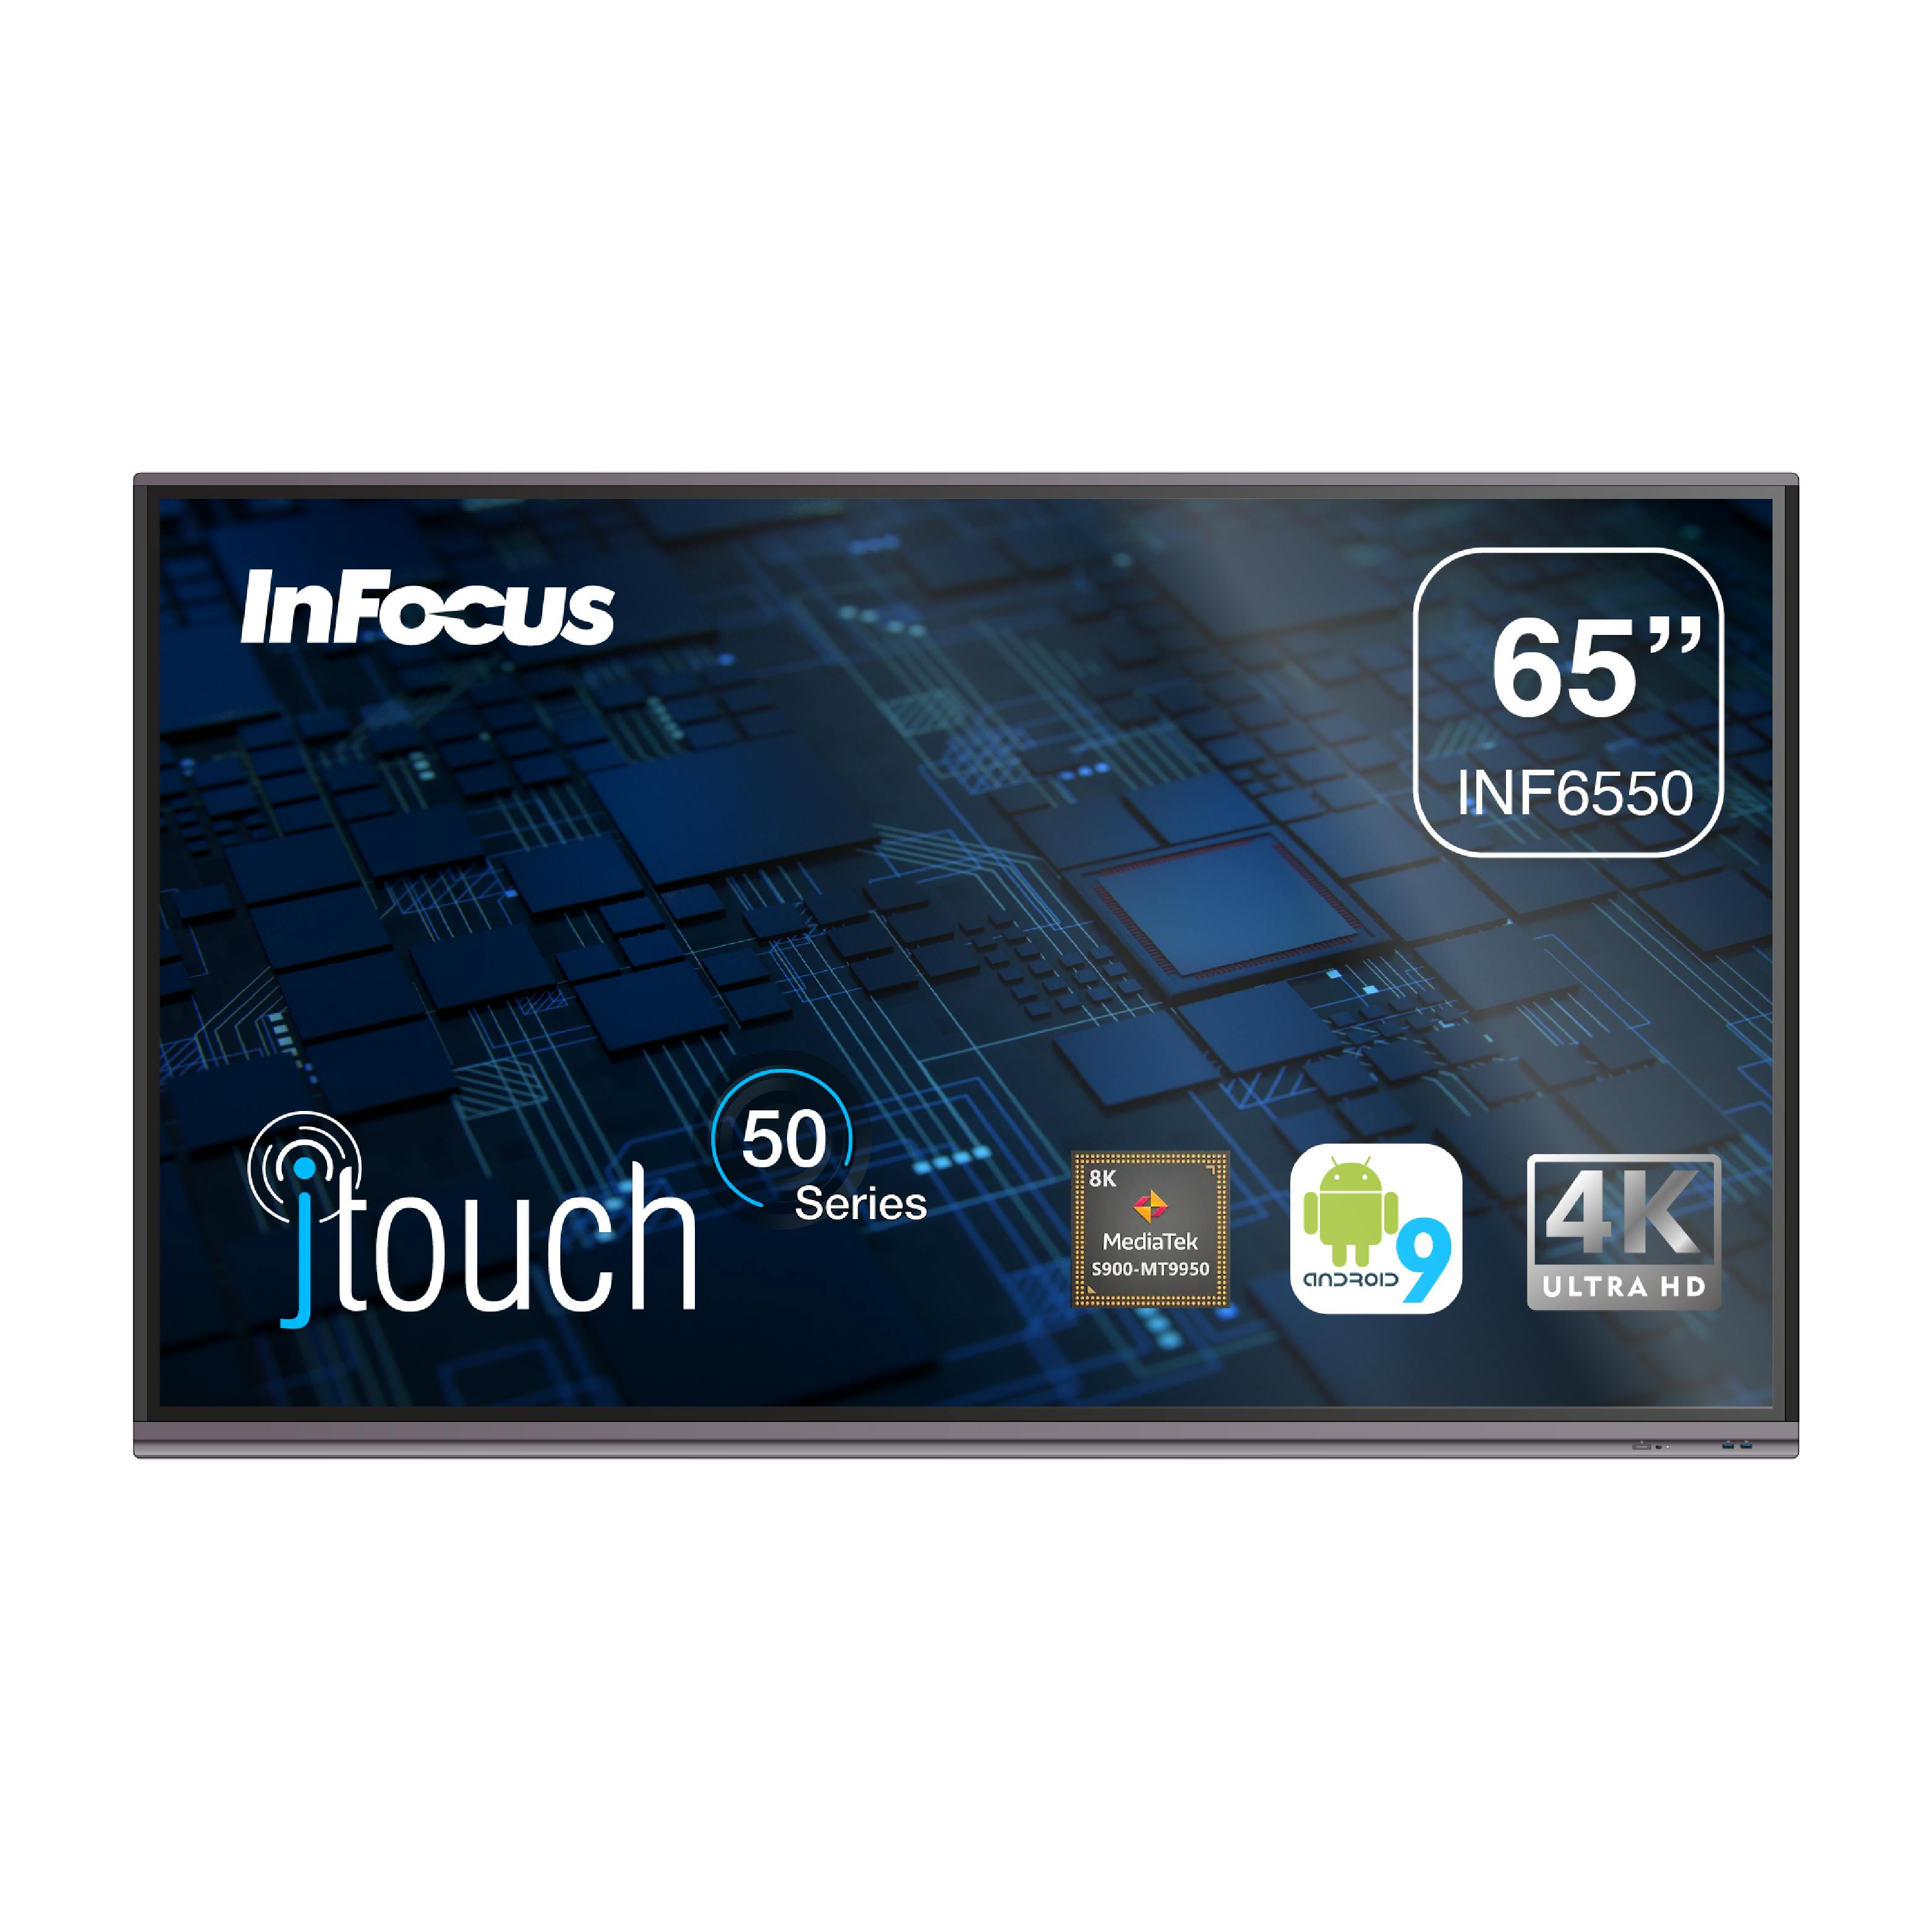 https://infocus.imgix.net/2022/04/JTouch-50-Series_INF6550_F_90-01.png?auto=compress%2Cformat&ixlib=php-3.3.0